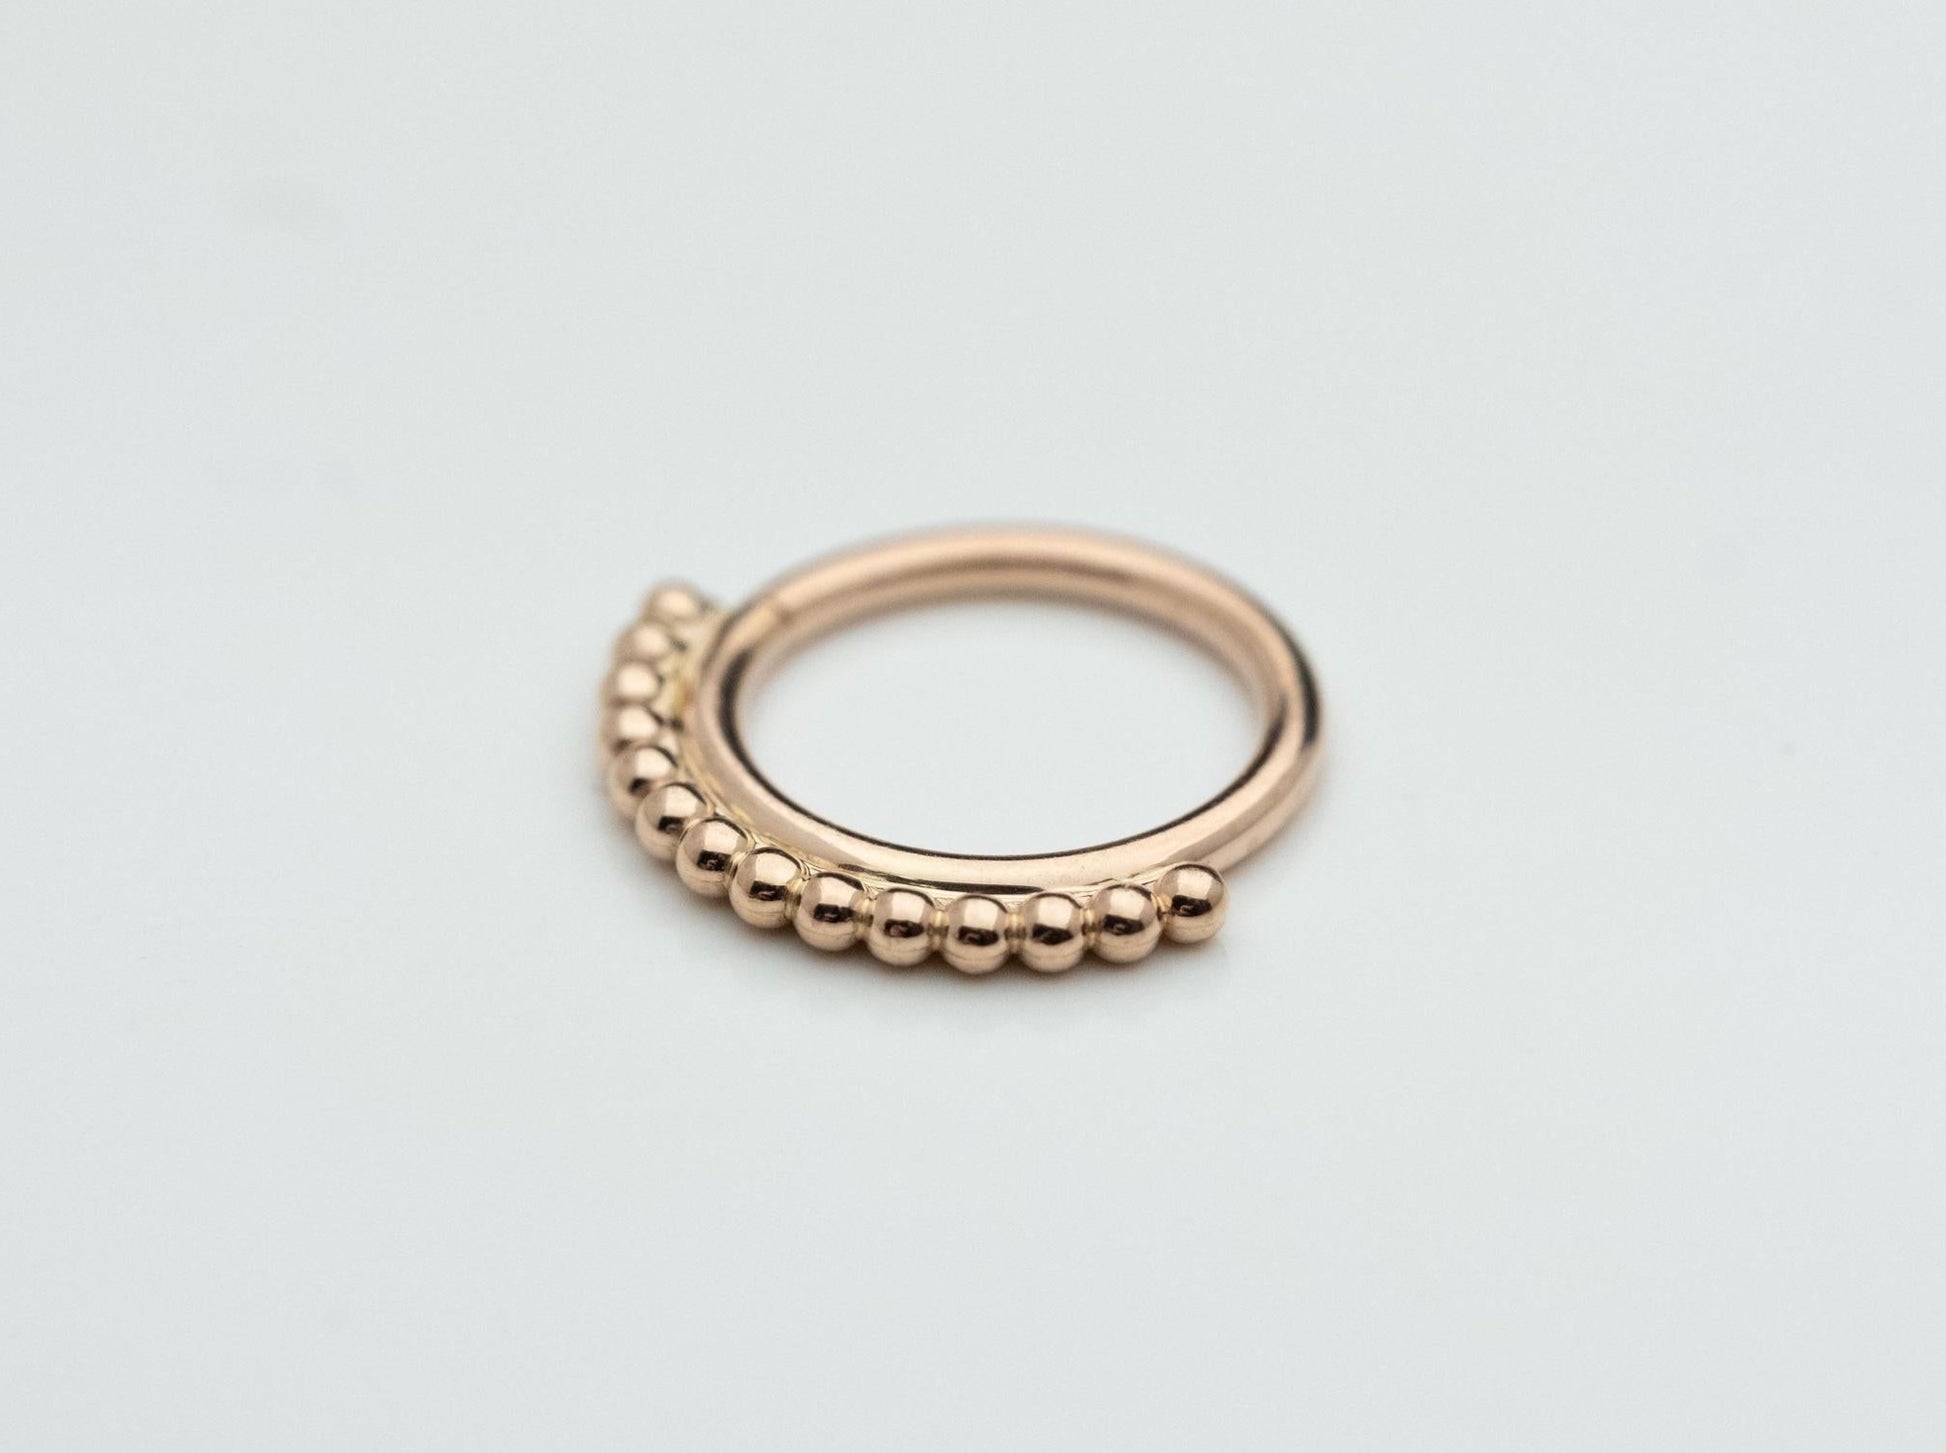 Latchmi Seam Ring in 14k Rose Gold by BVLA